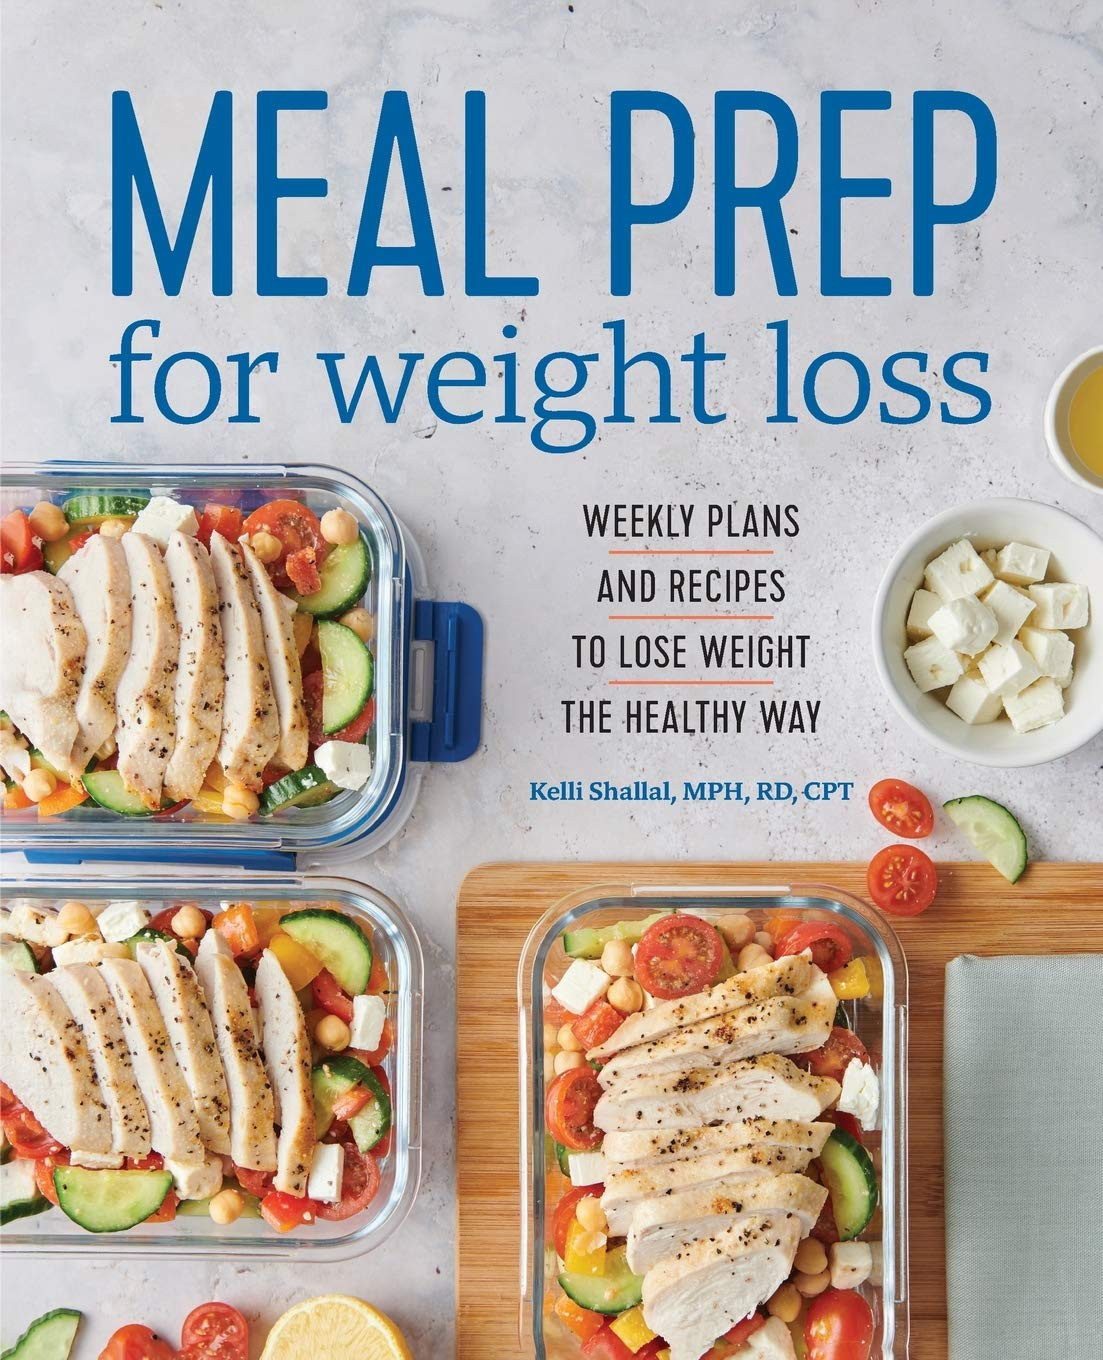 Healthy Meal Prep Recipes For Weight Loss
 Meal Prep for Weight Loss Weekly Plans and Recipes to